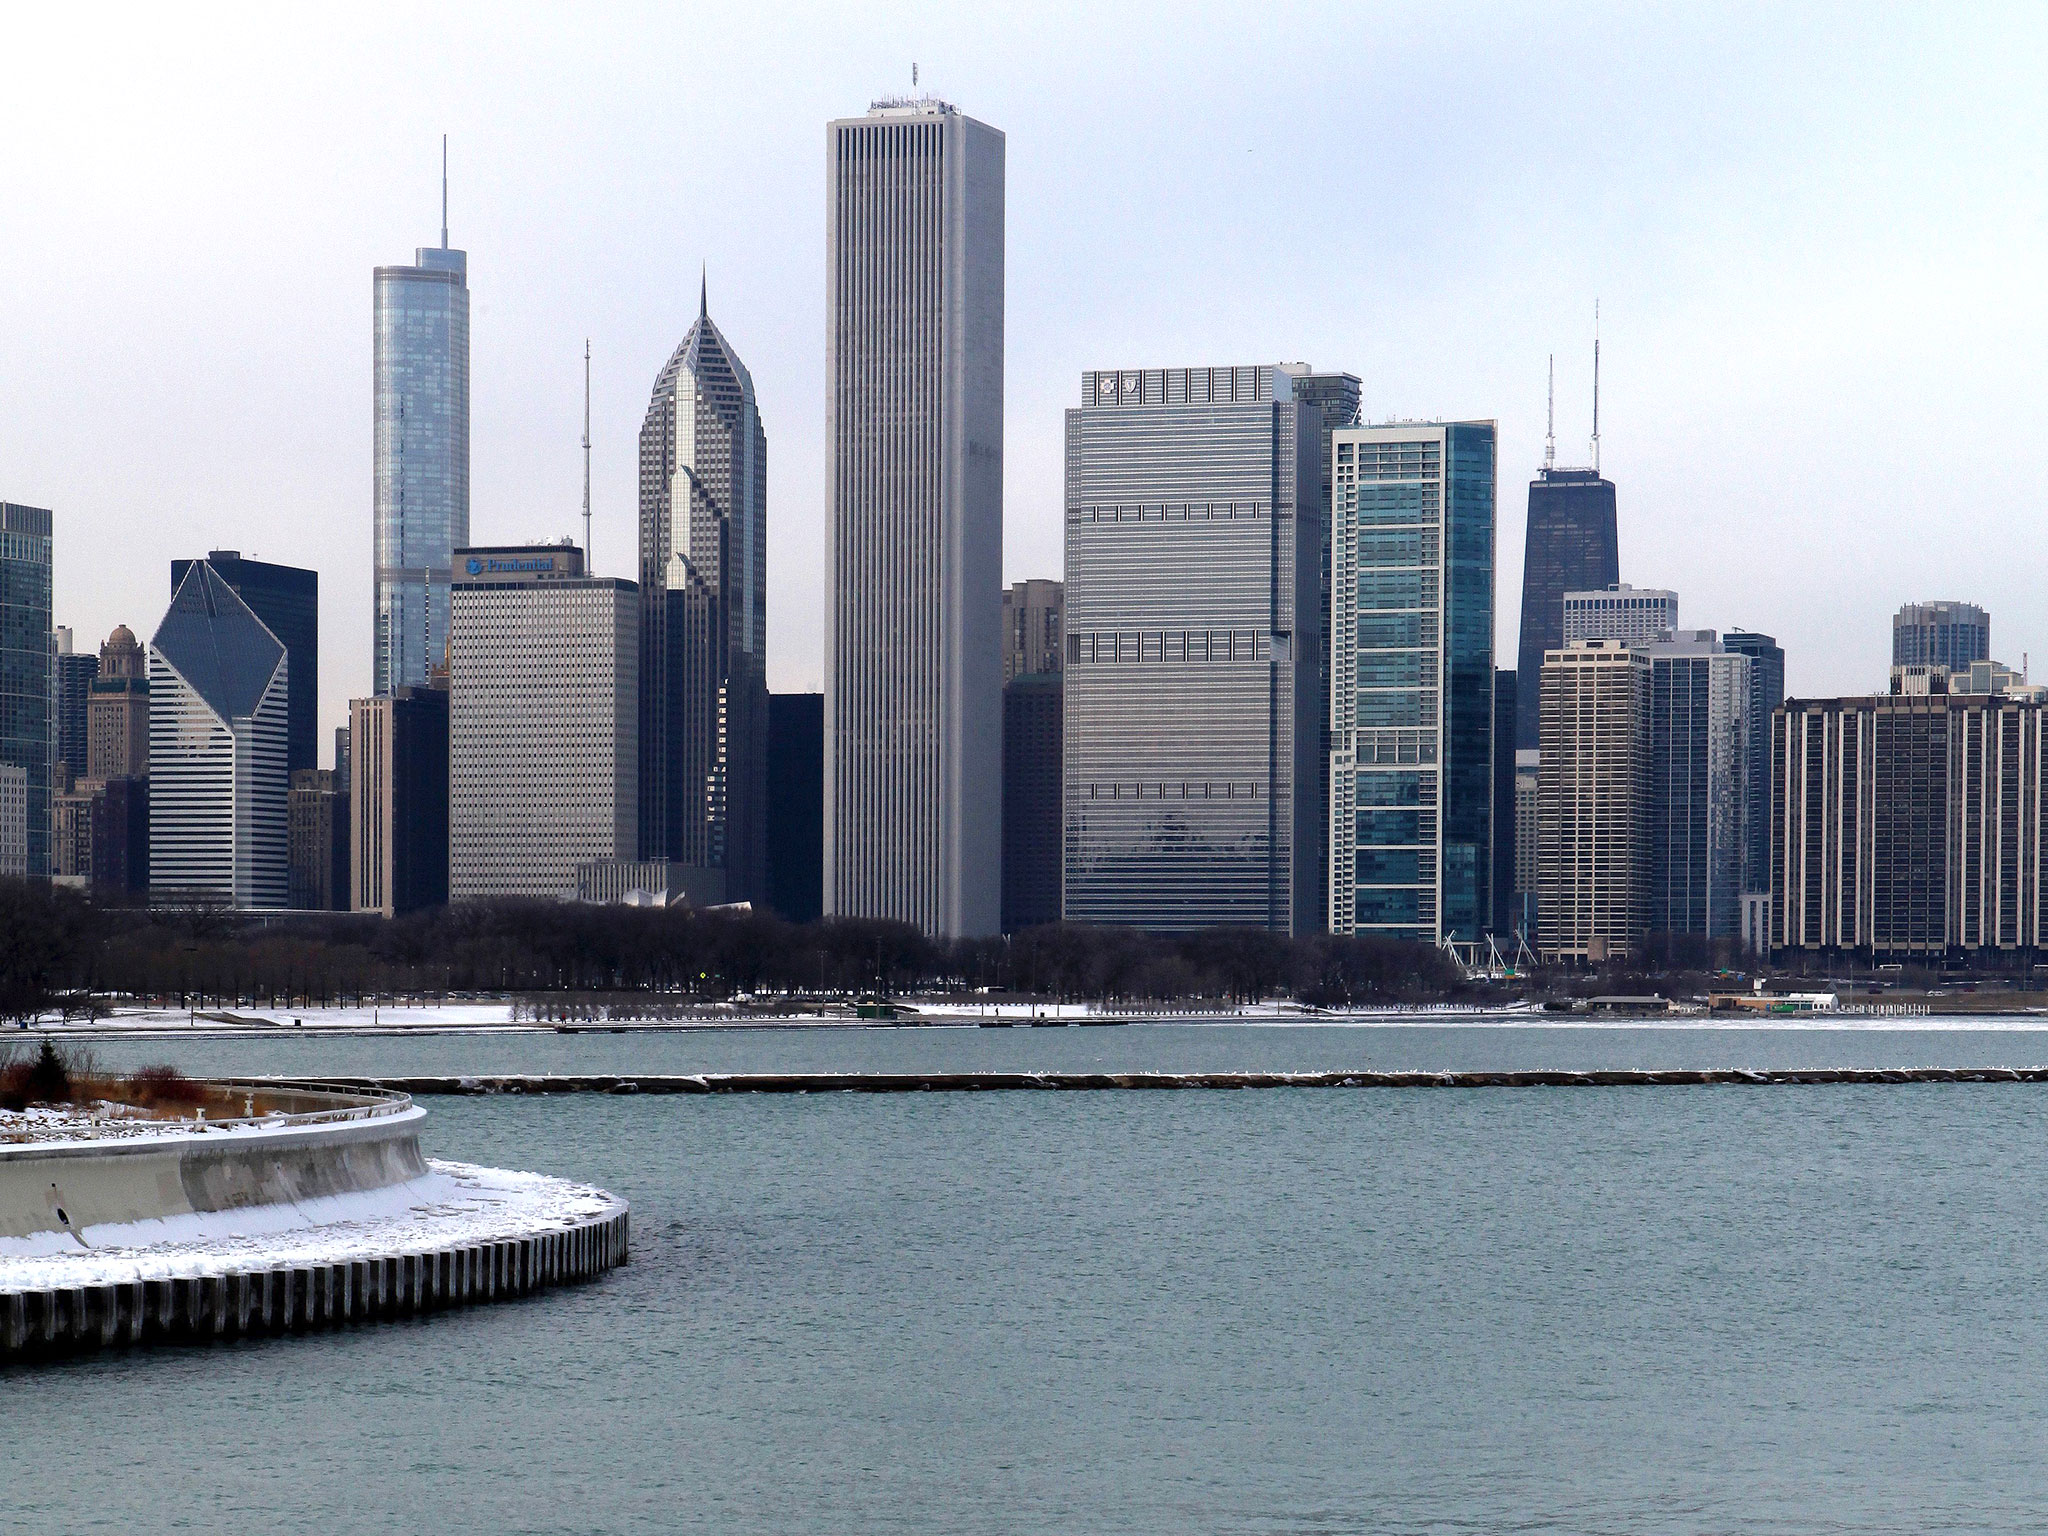 Partial view of the Chicago skyline on Jan. 28, 2015.
